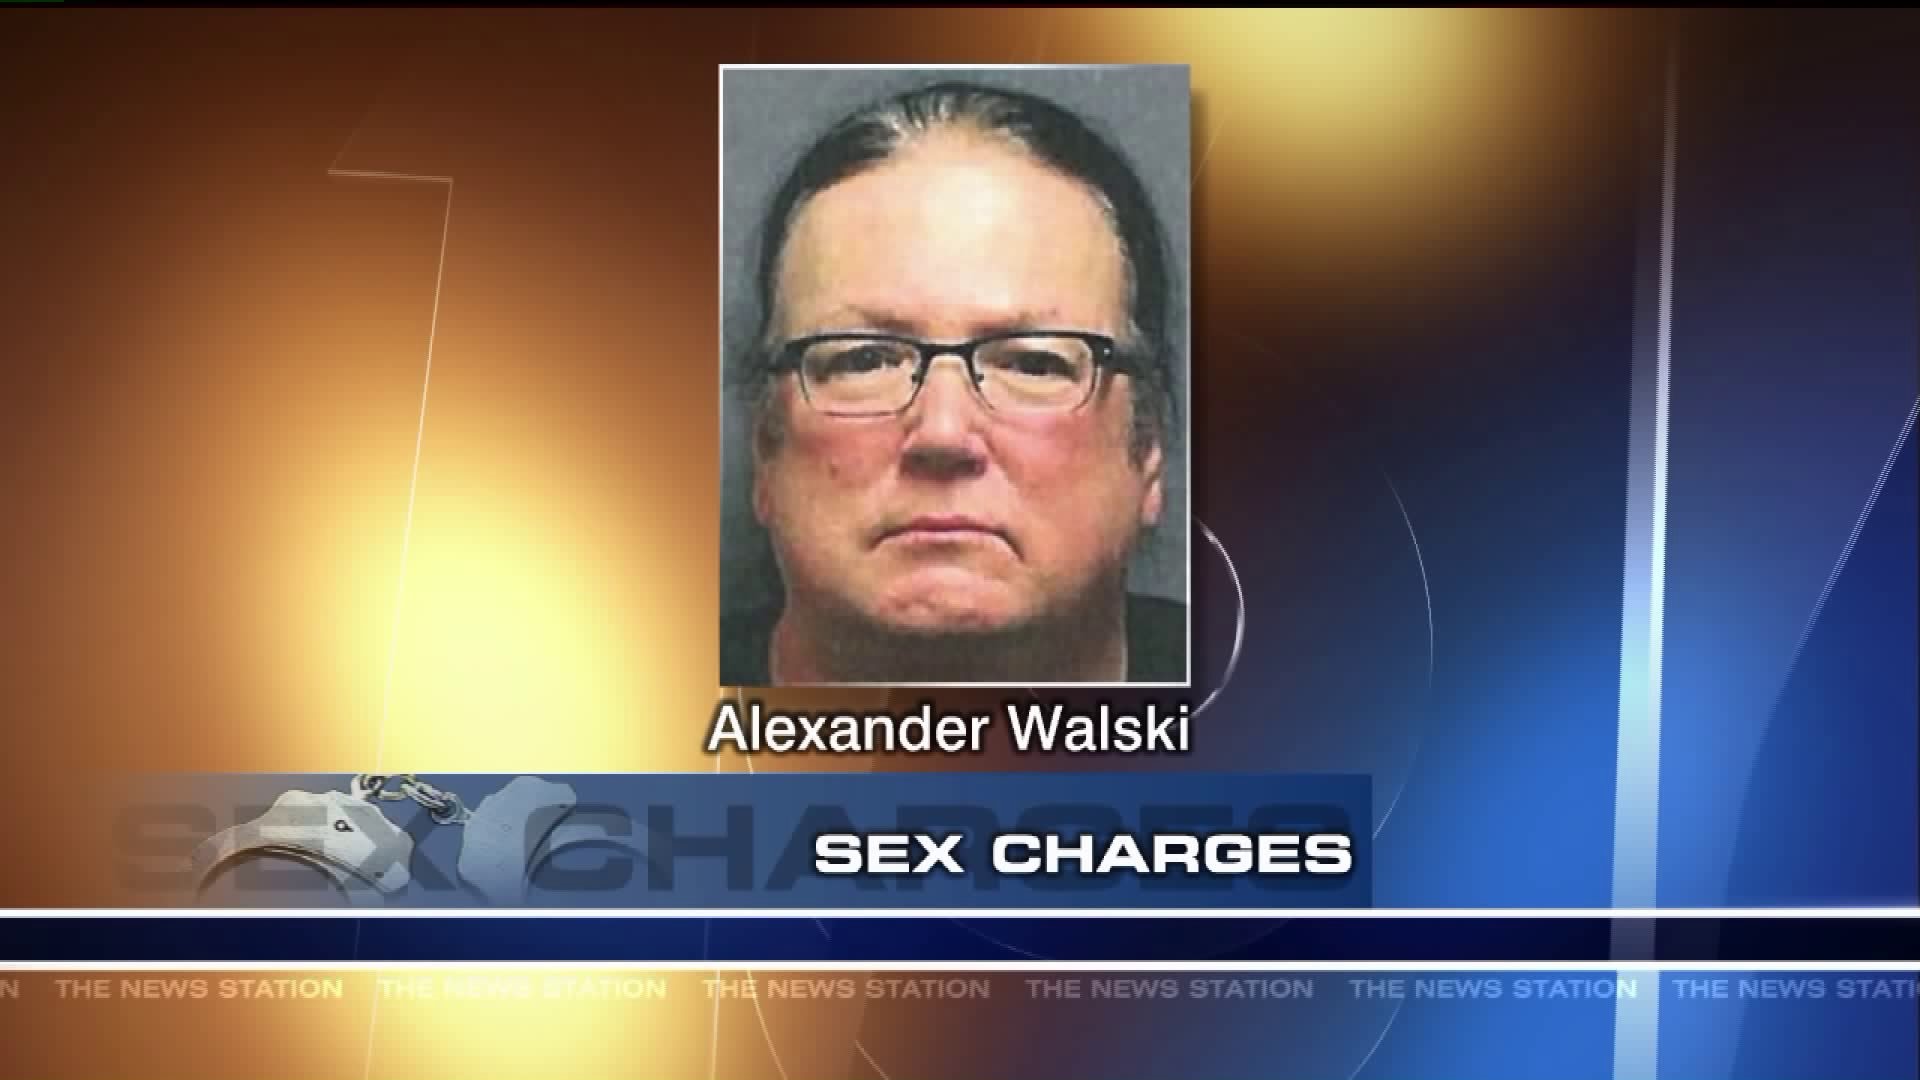 Wilkes-Barre Man Facing Sex Assault Charges